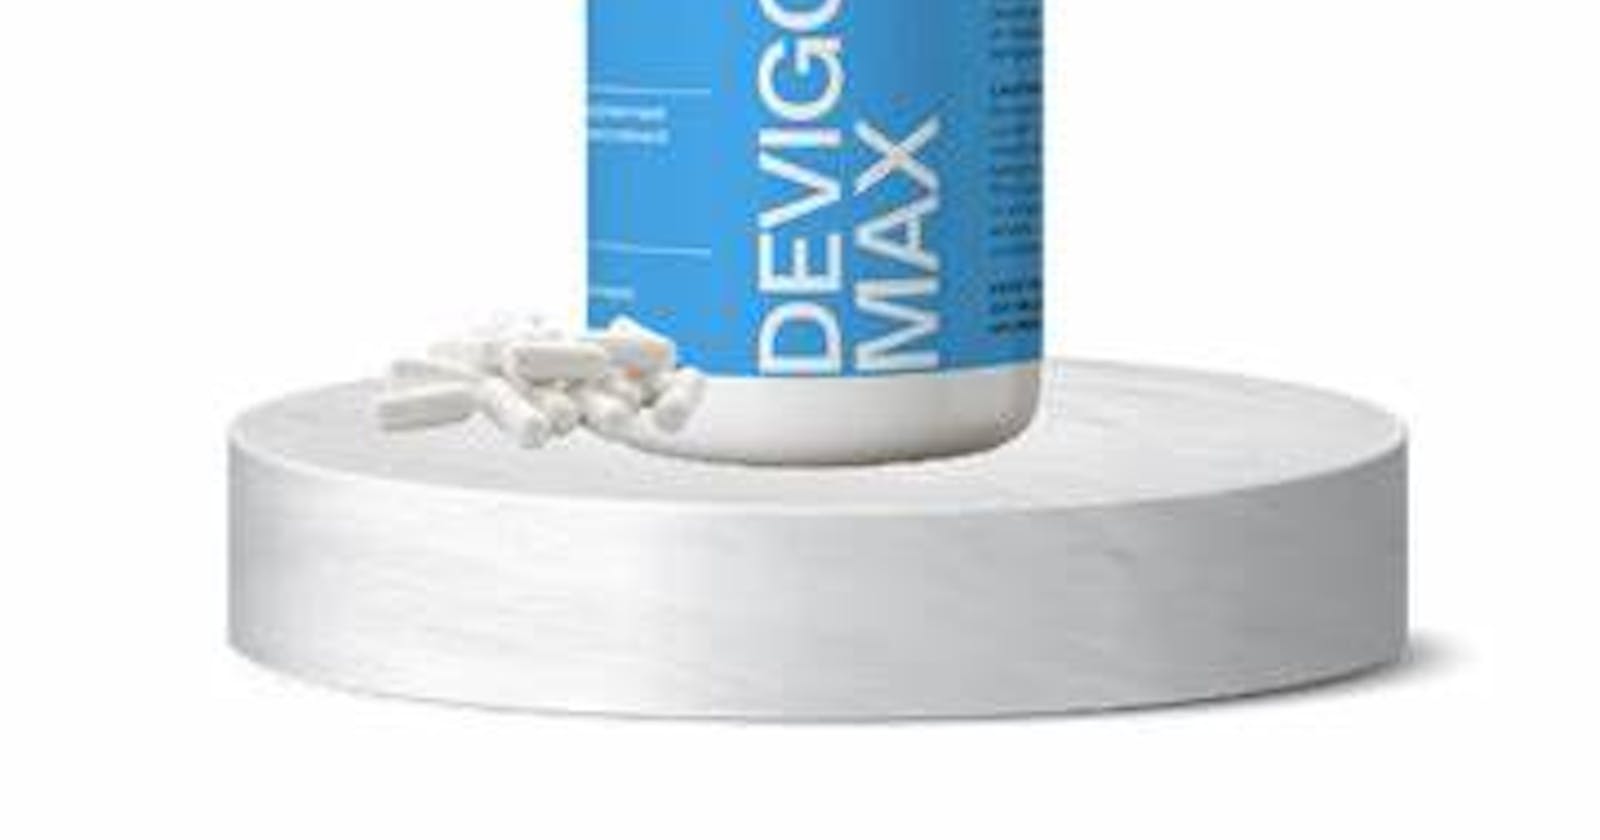 DevigorMax Reviews – Does This Product Really Work?